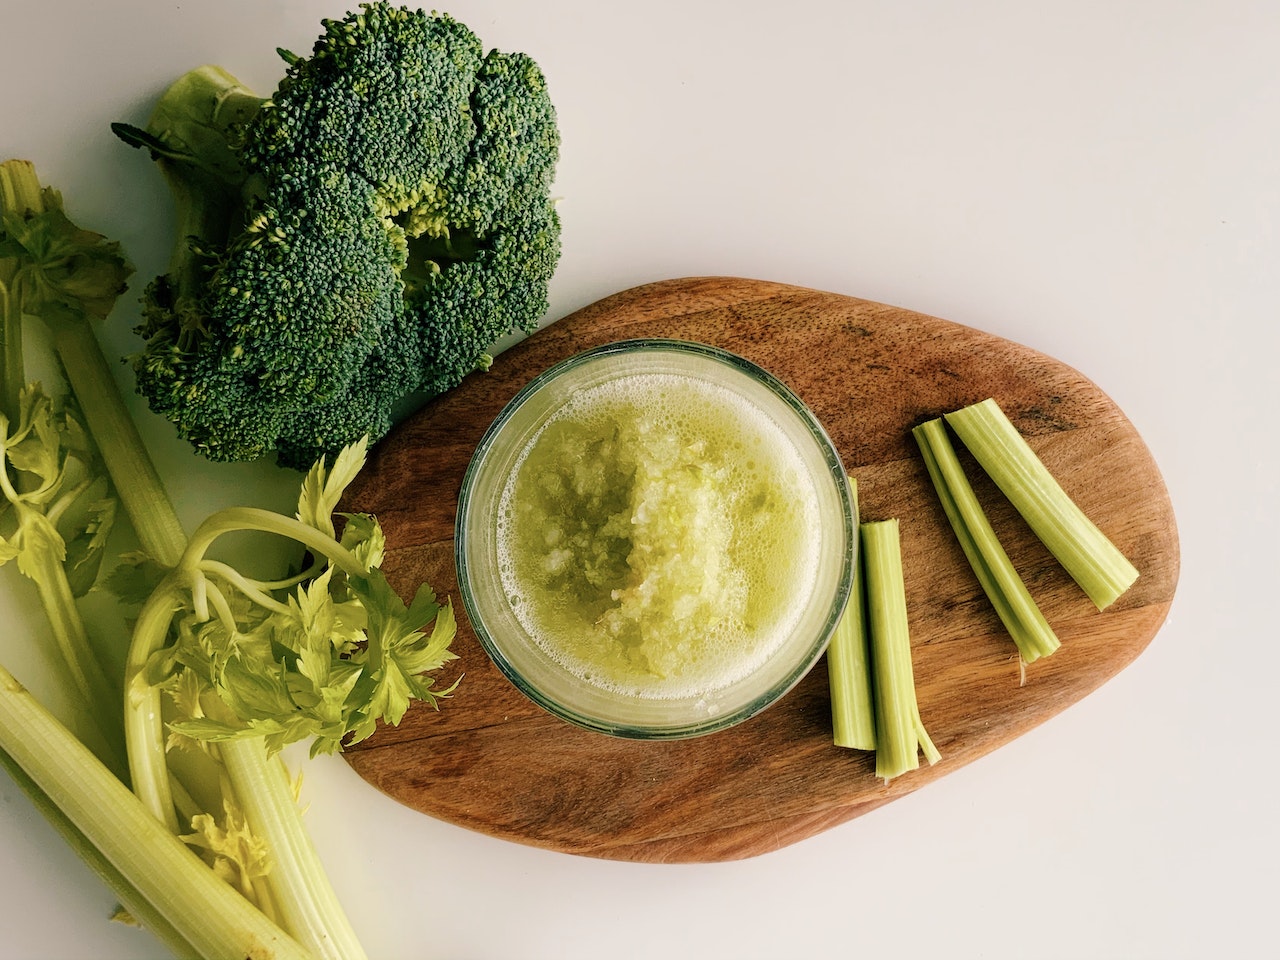 celery and broccoli on a wooden cutting board